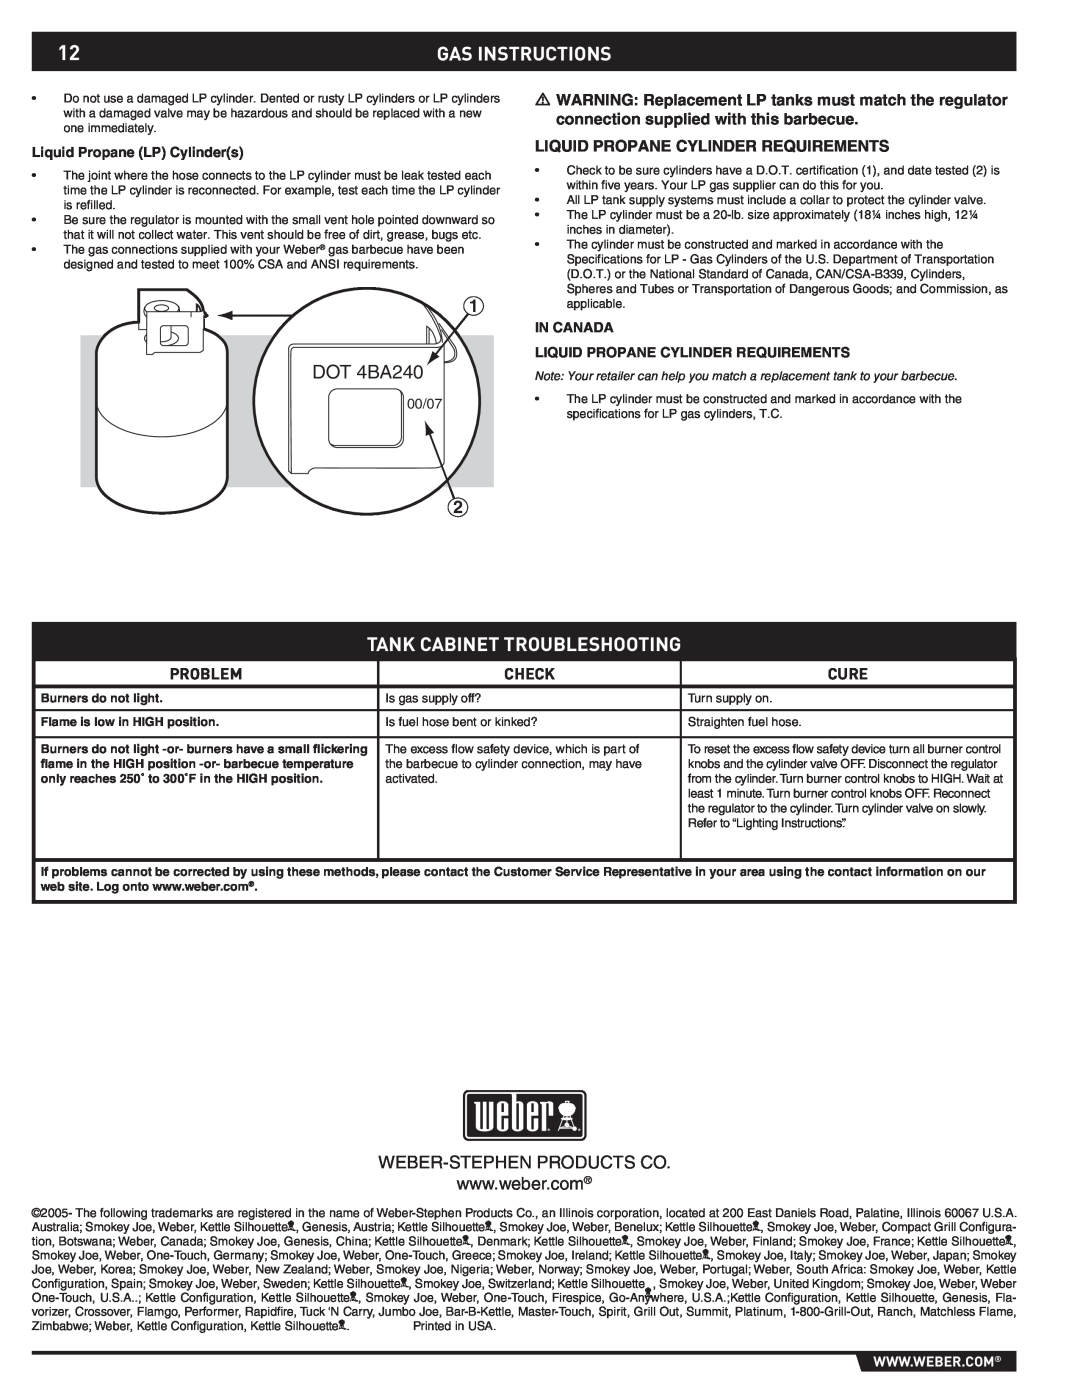 Weber 43176 Gas Instructions, Tank Cabinet Troubleshooting, DOT 4BA240, Problem, Check, Cure, Liquid Propane LP Cylinders 